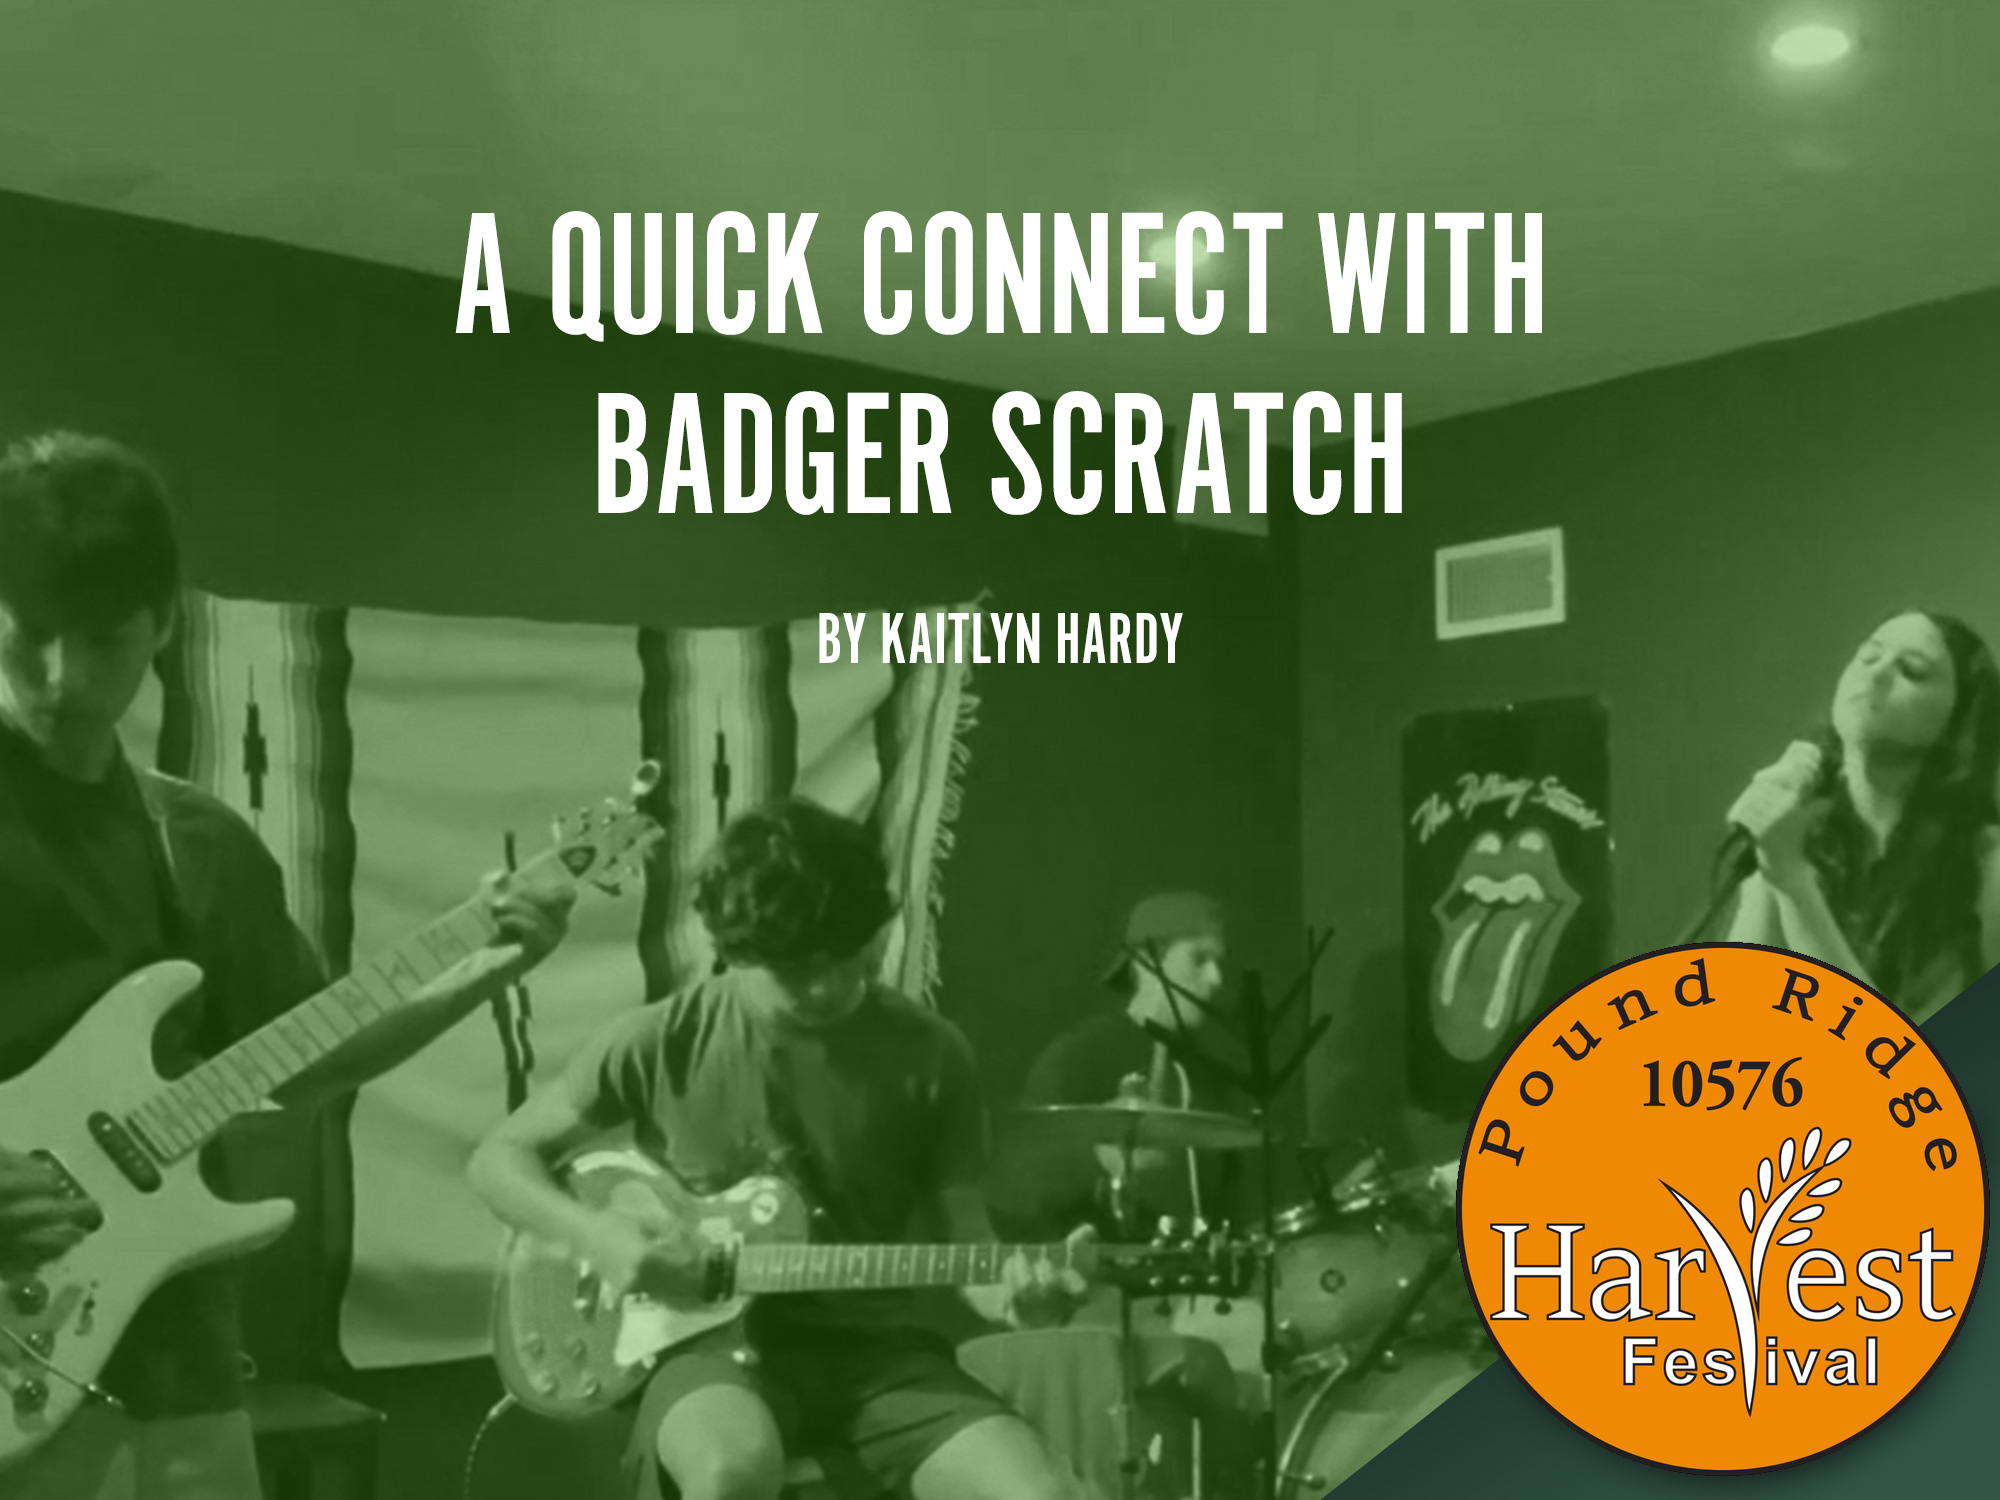 A Quick Connect with Badger Scratch